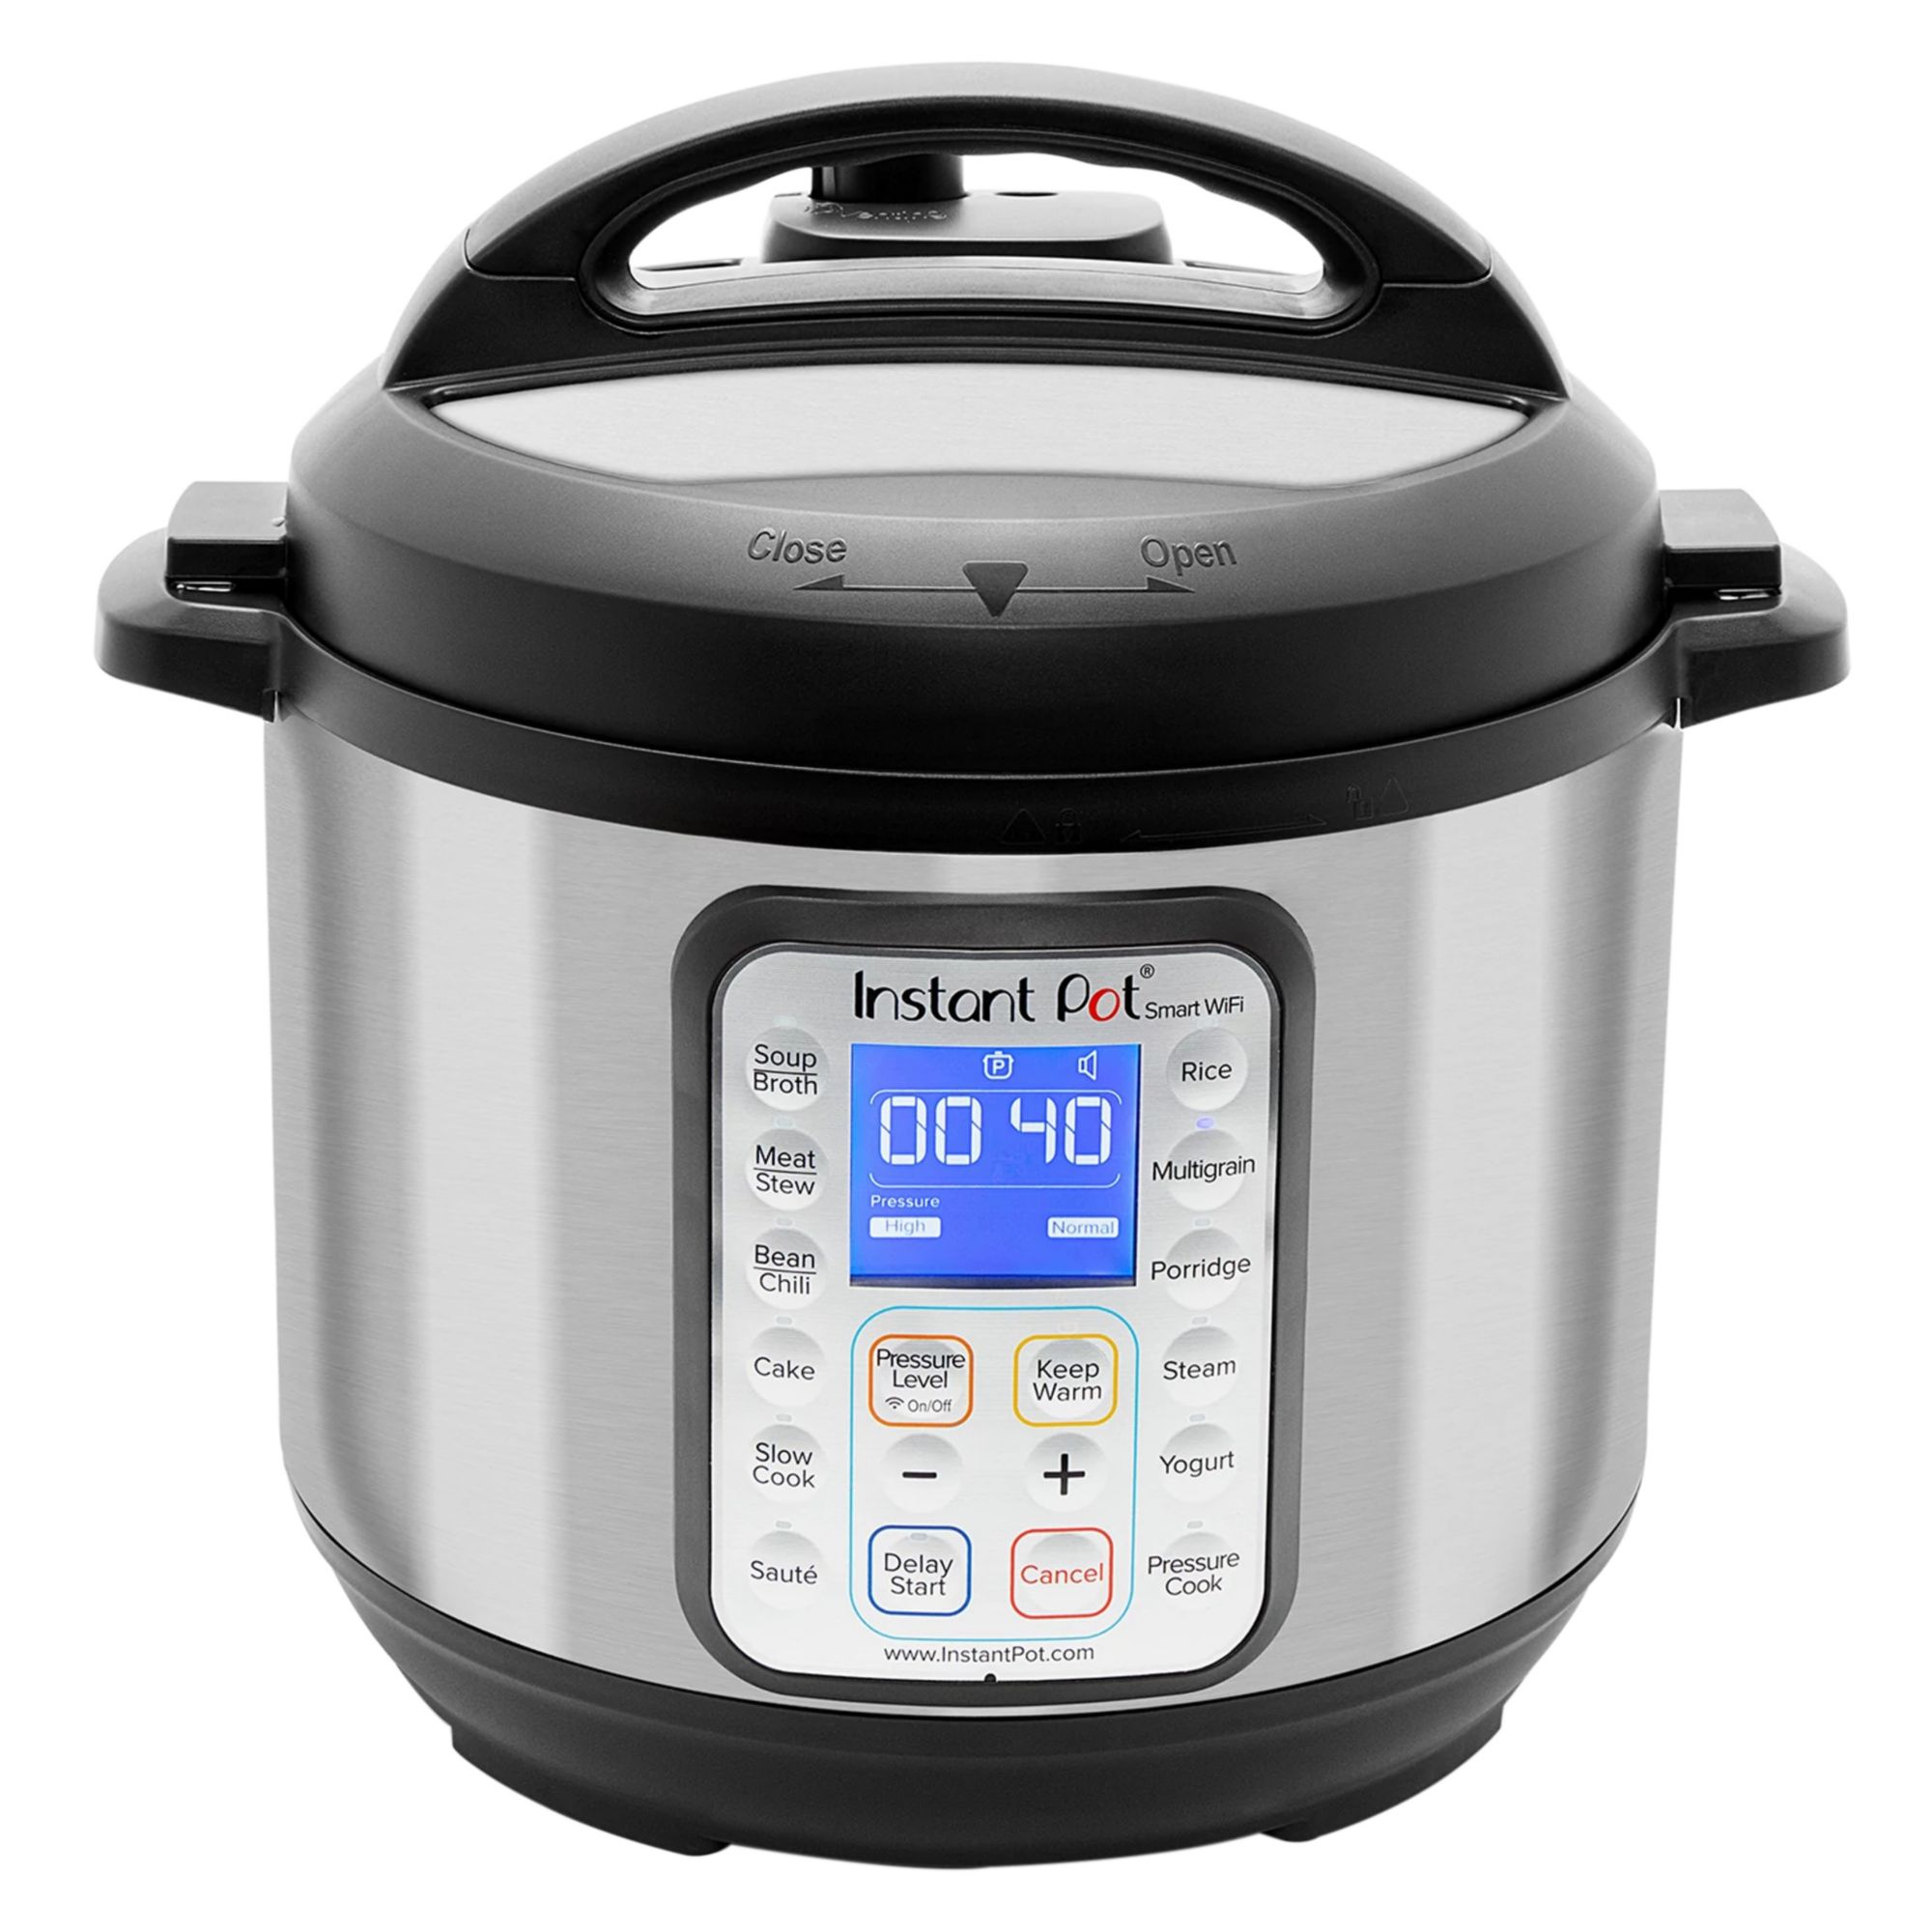 Instant Pot® Lux Stainless Steel 6-in-1 Programmable Pressure Cooker -  Silver/Black, 3 qt - Mariano's